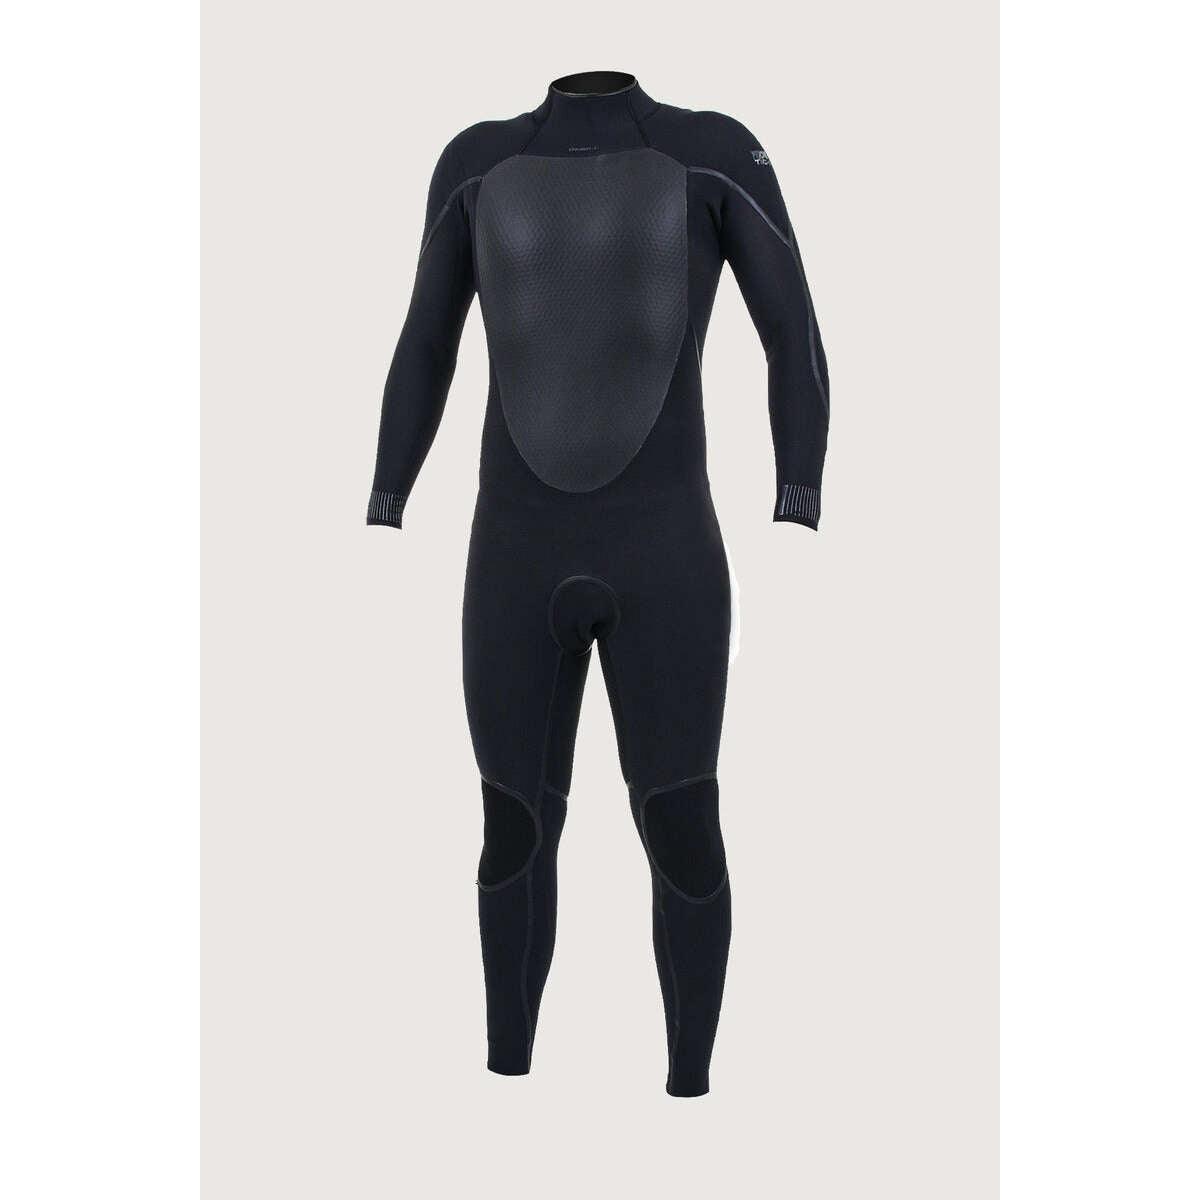 O'Neill Psycho One 4/3 Full Wetsuit - Poole Harbour Watersports